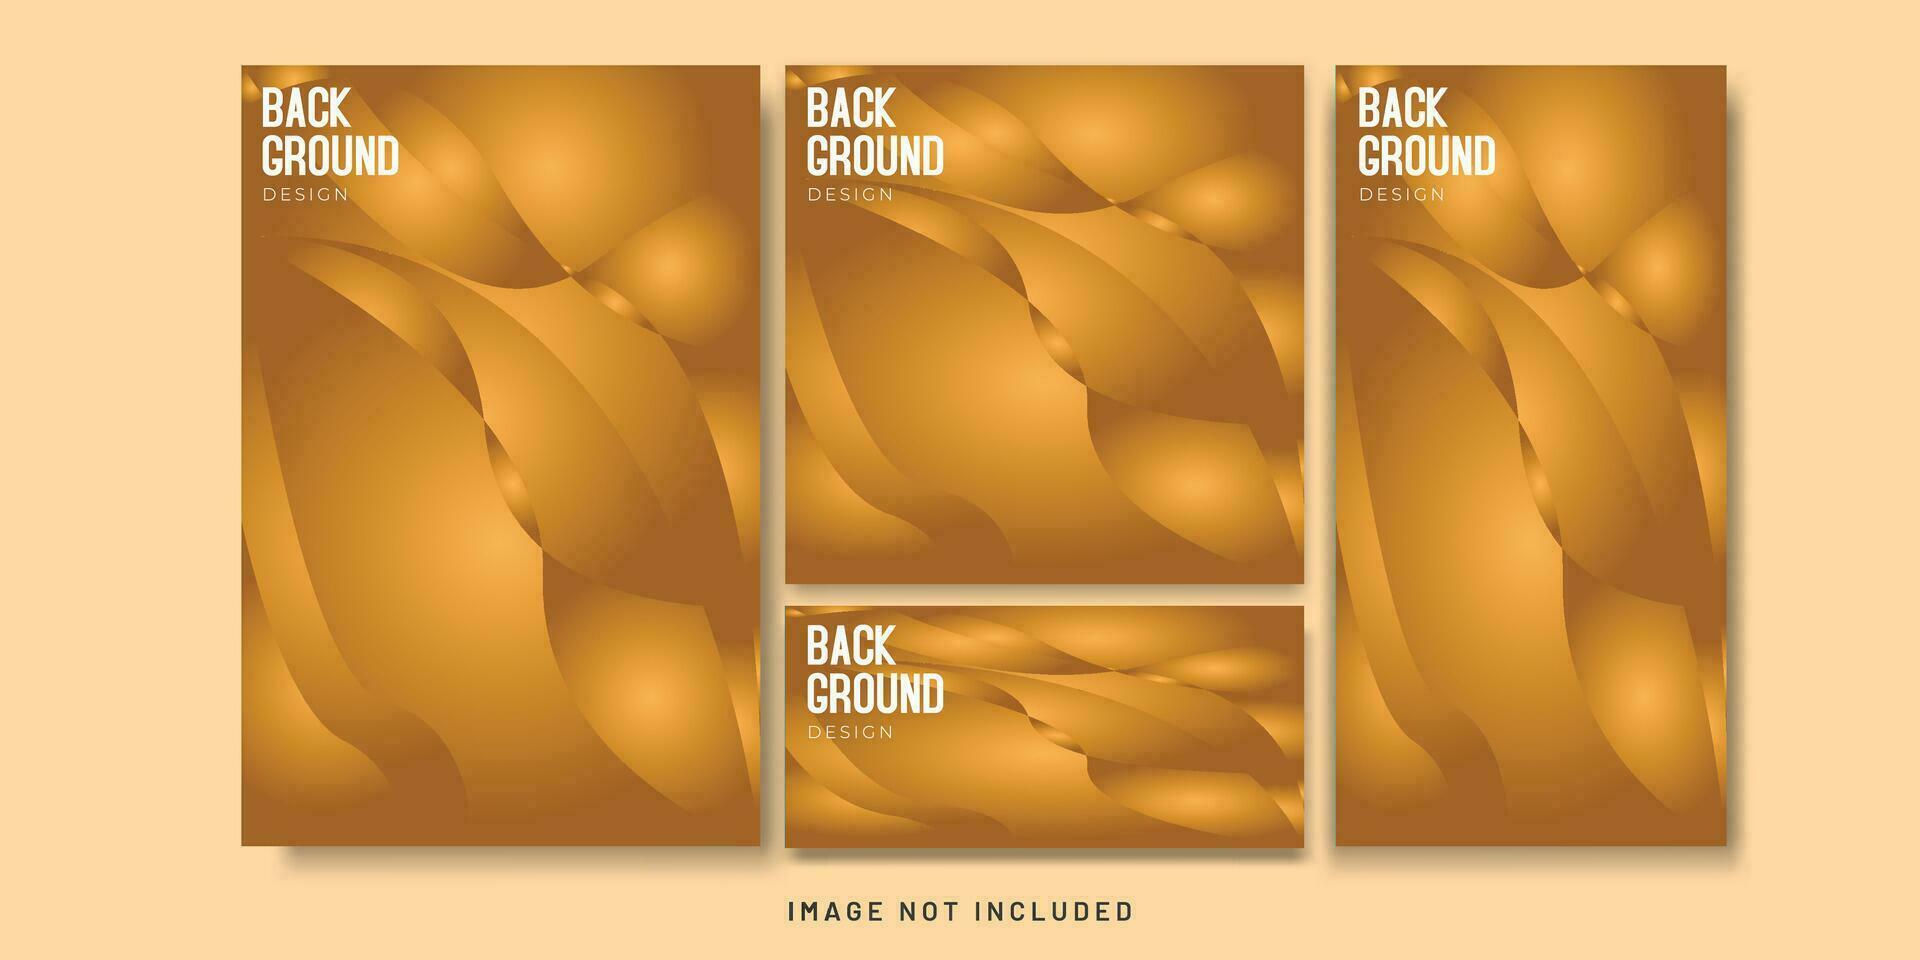 Background Abstract Geometric Flyer and Social media Bundle Set vector